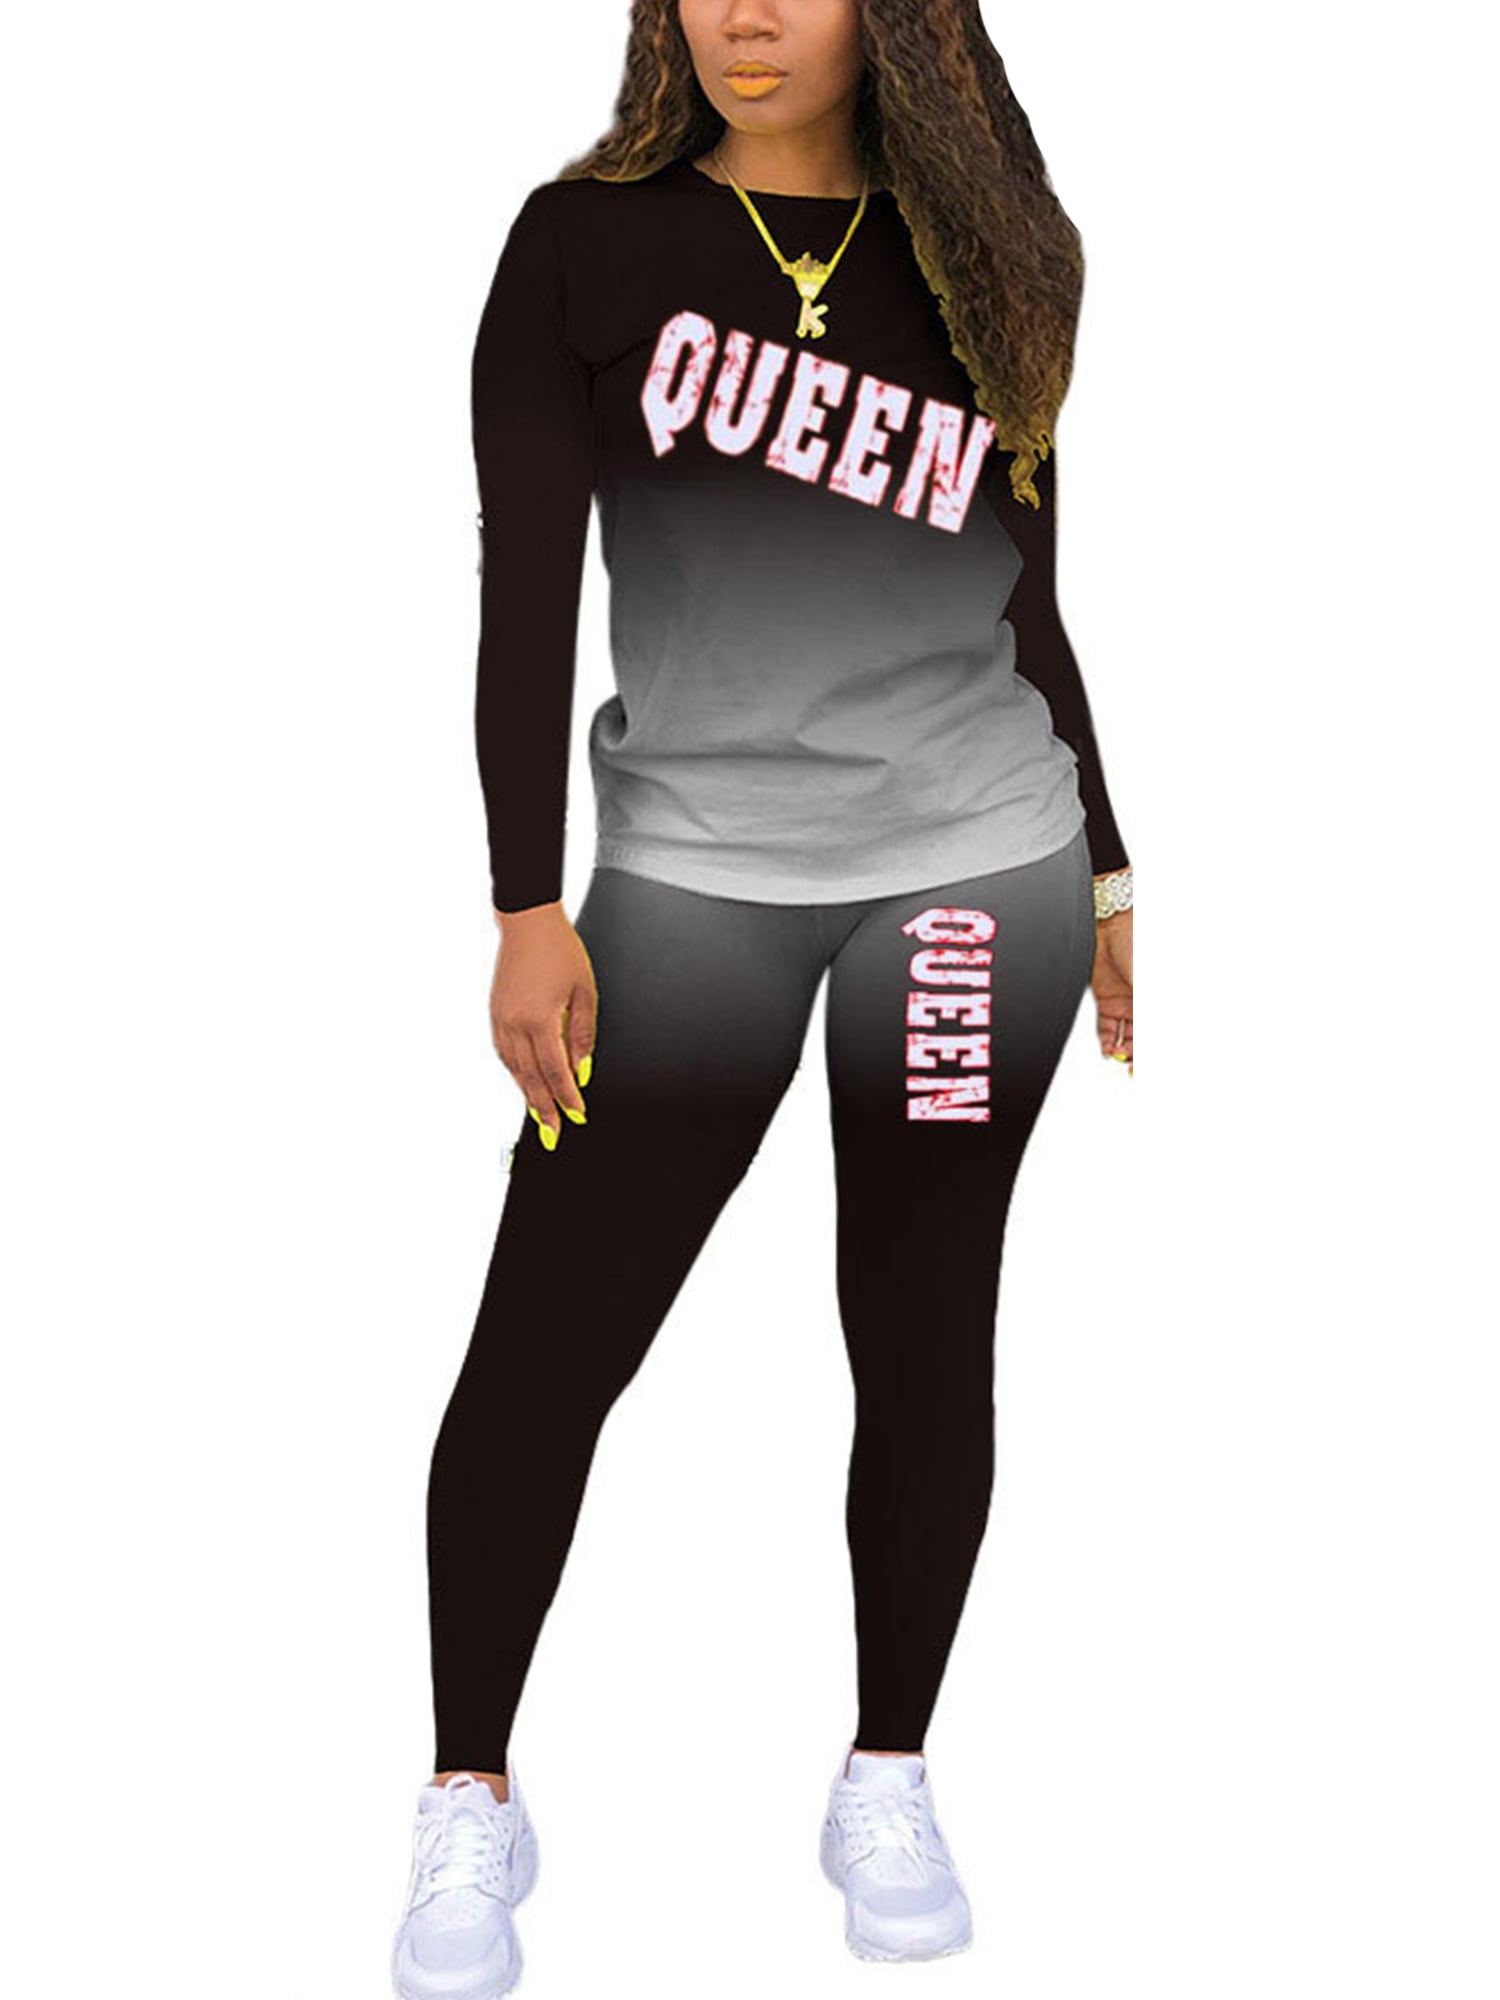 Women Sweatsuits Sets with Pockets Stripe Letter Print Tracksuit Long Sleeve Zipper Sweatshirt Hoodies and Bodycon Long Pants Sets 2 Piece Outfits 